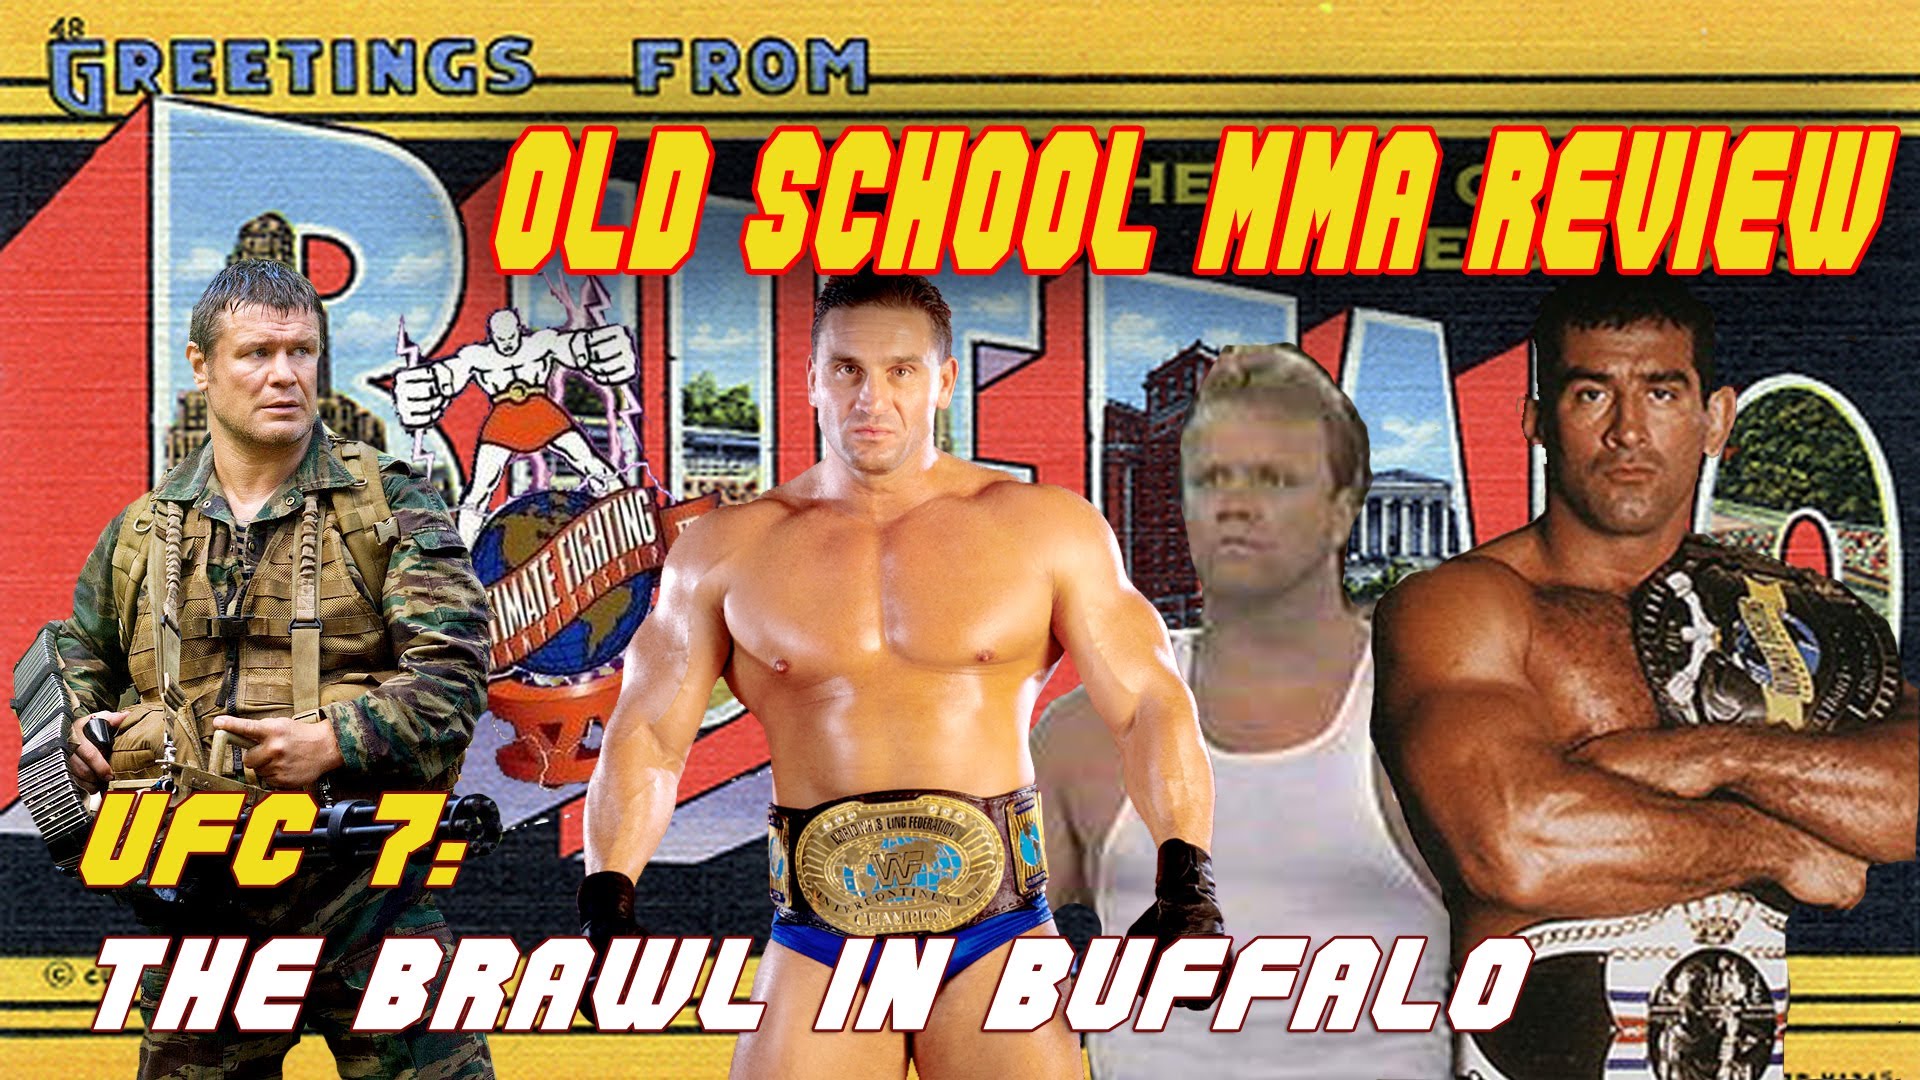 Old School MMA Review: UFC 7 - The Brawl in Buffalo MMA Video